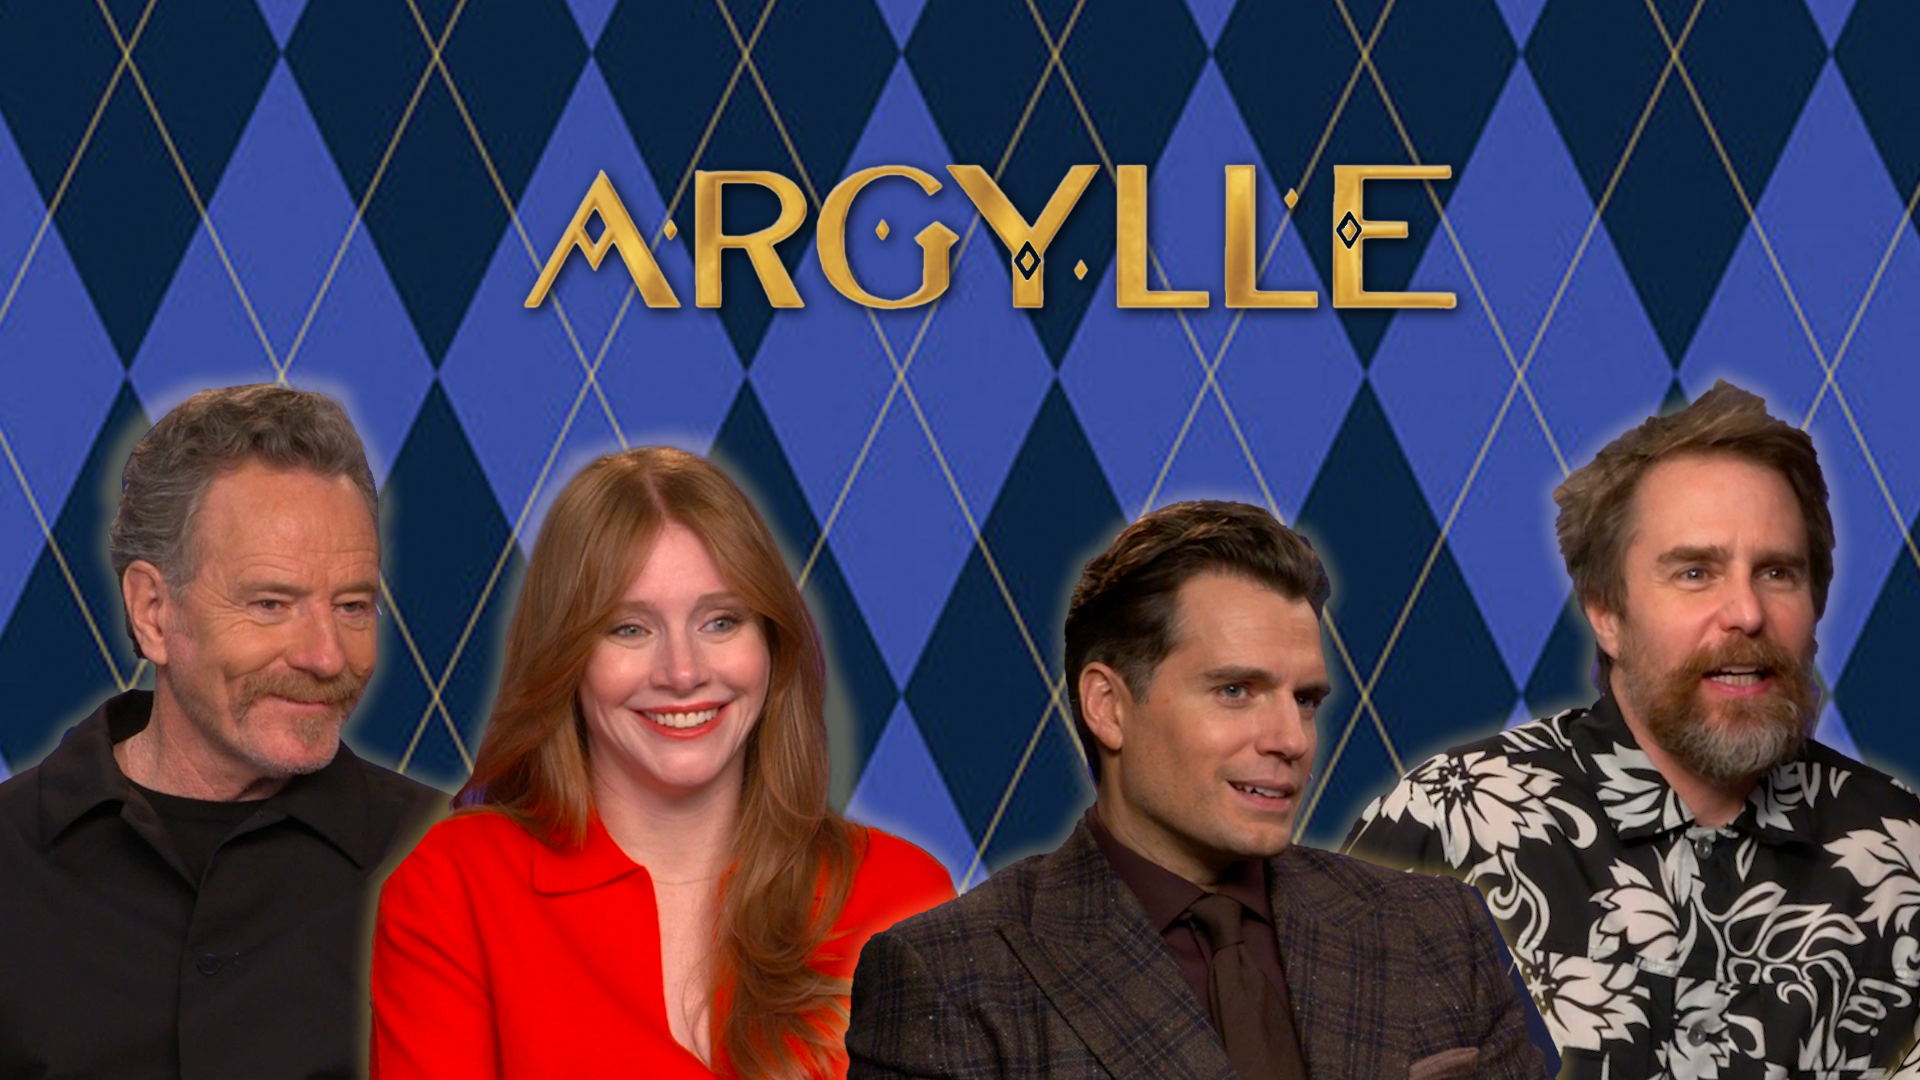 Bryan Cranston, Bryce Dallas Howard, Henry Cavill, and Sam Rockwell in front of an ‘Argylle’ wallpaper.